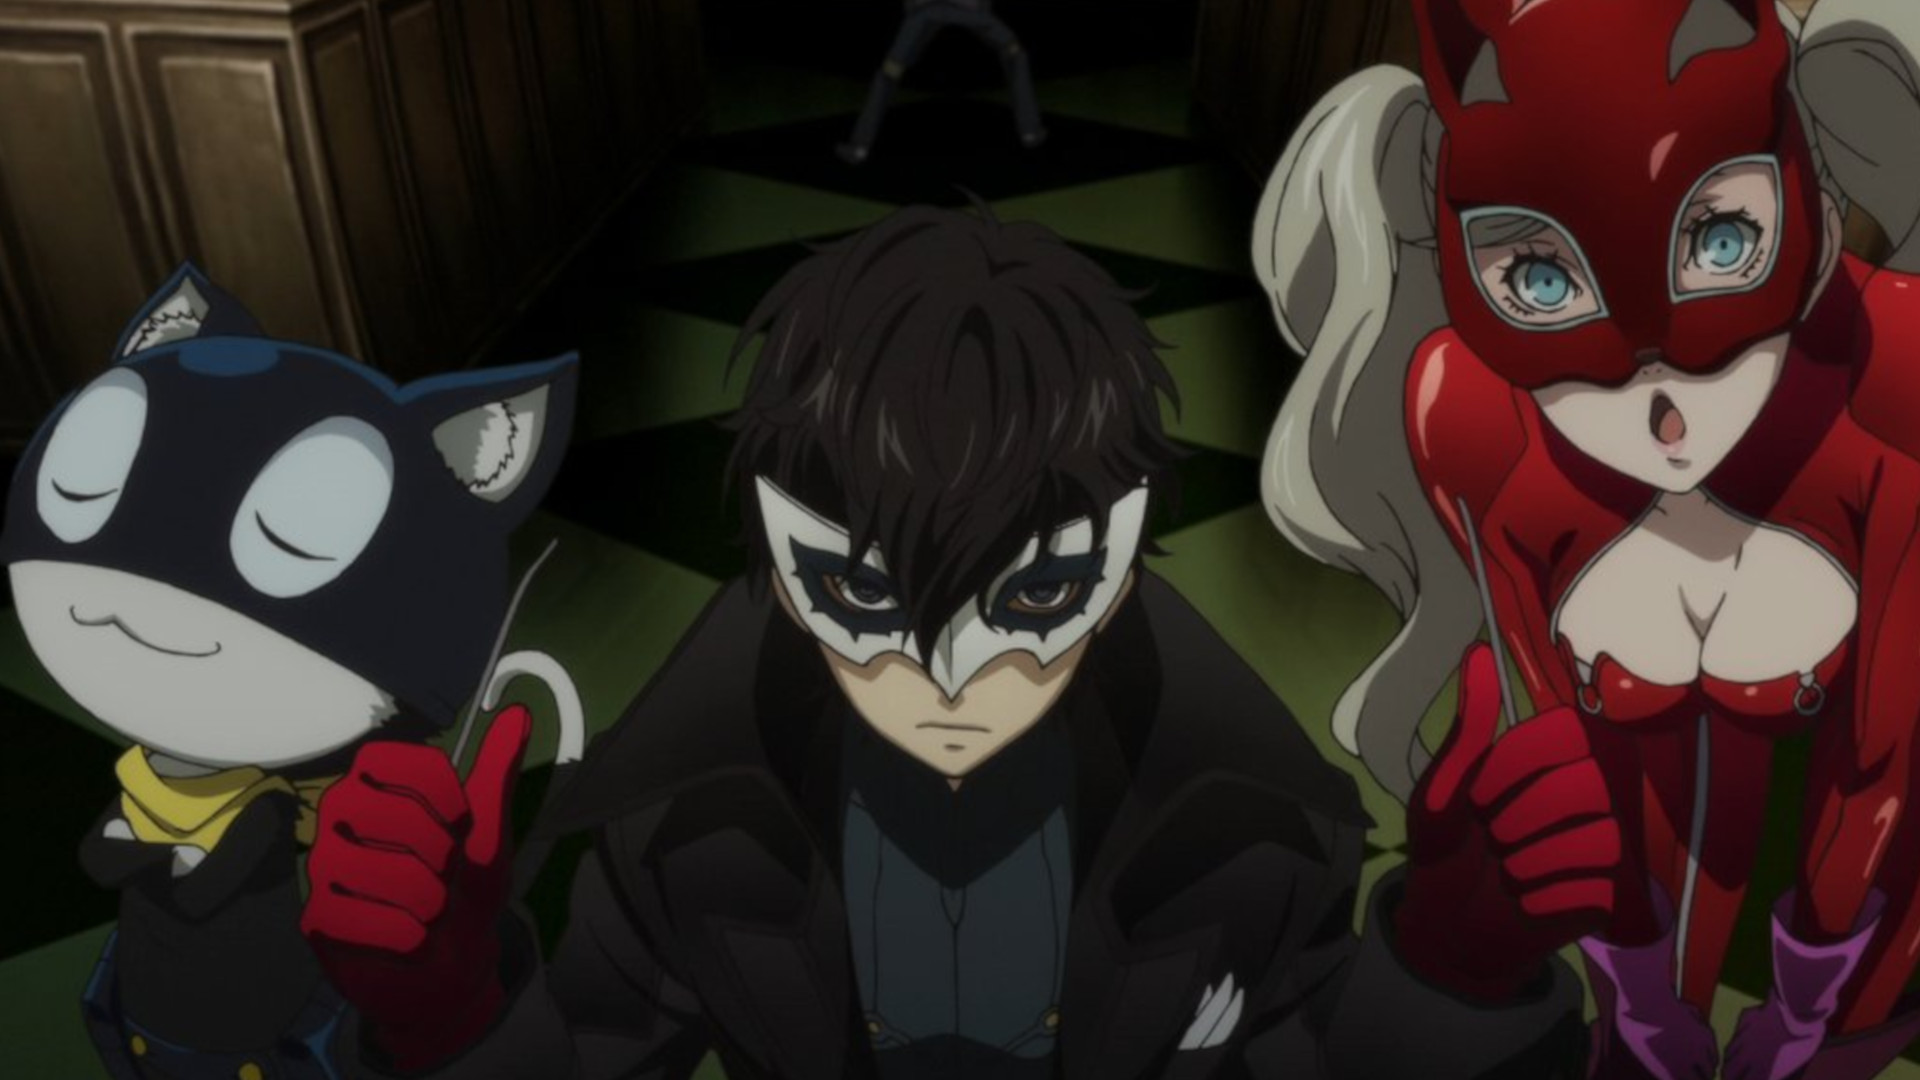 The Persona 5 anime story, cast, length, and more | Pocket Tactics